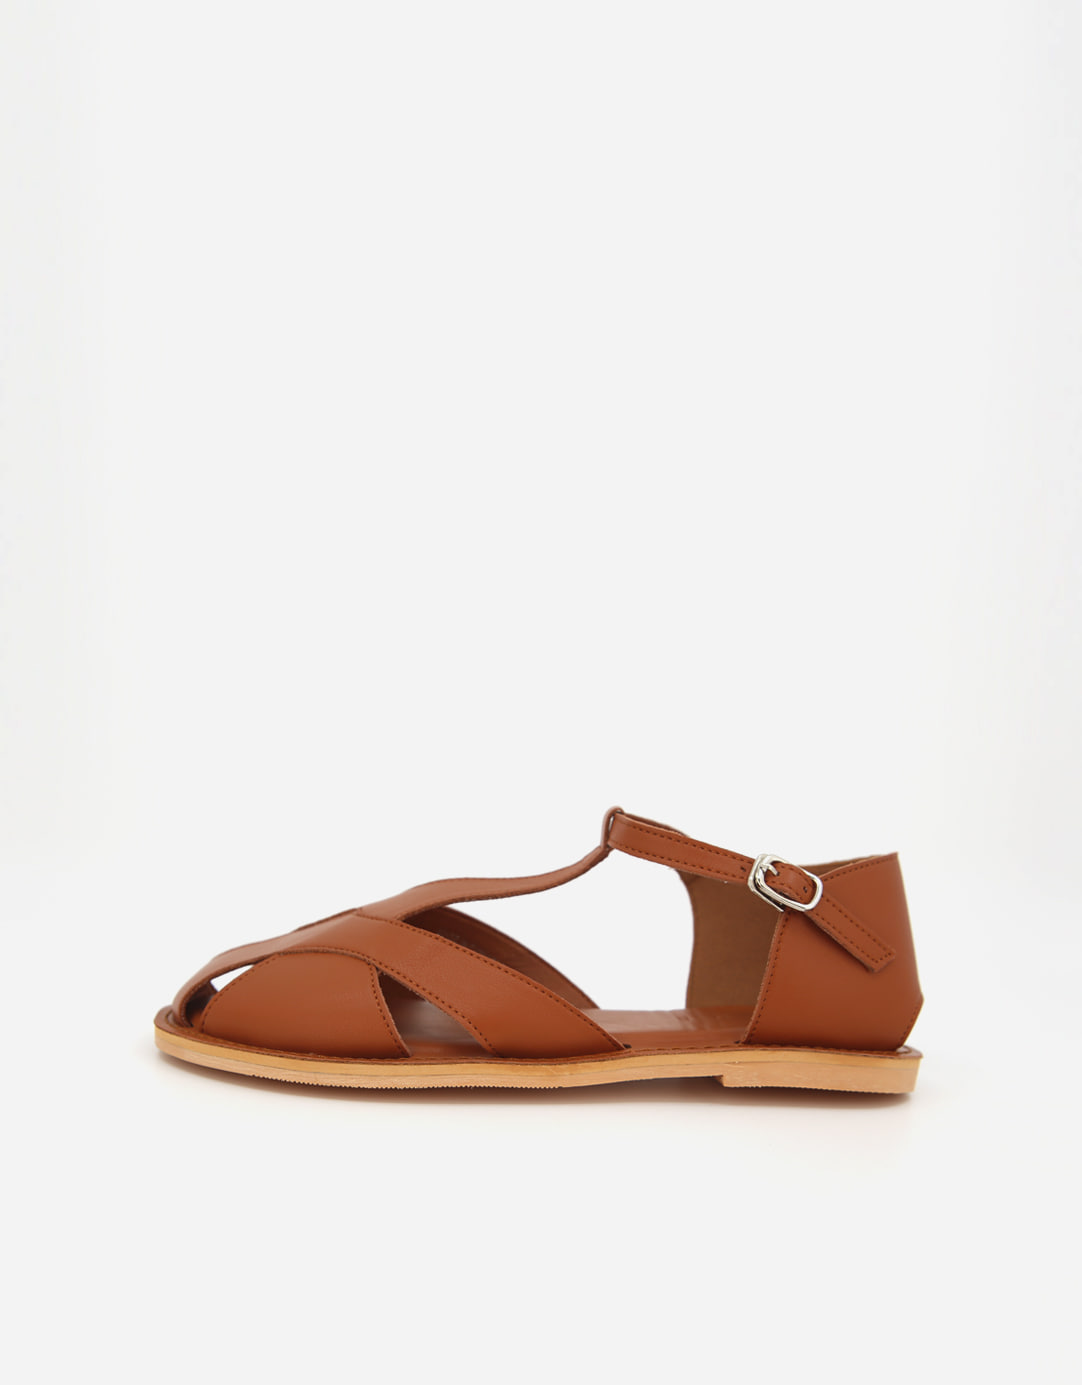 DAILY FISHER STRAP SANDAL